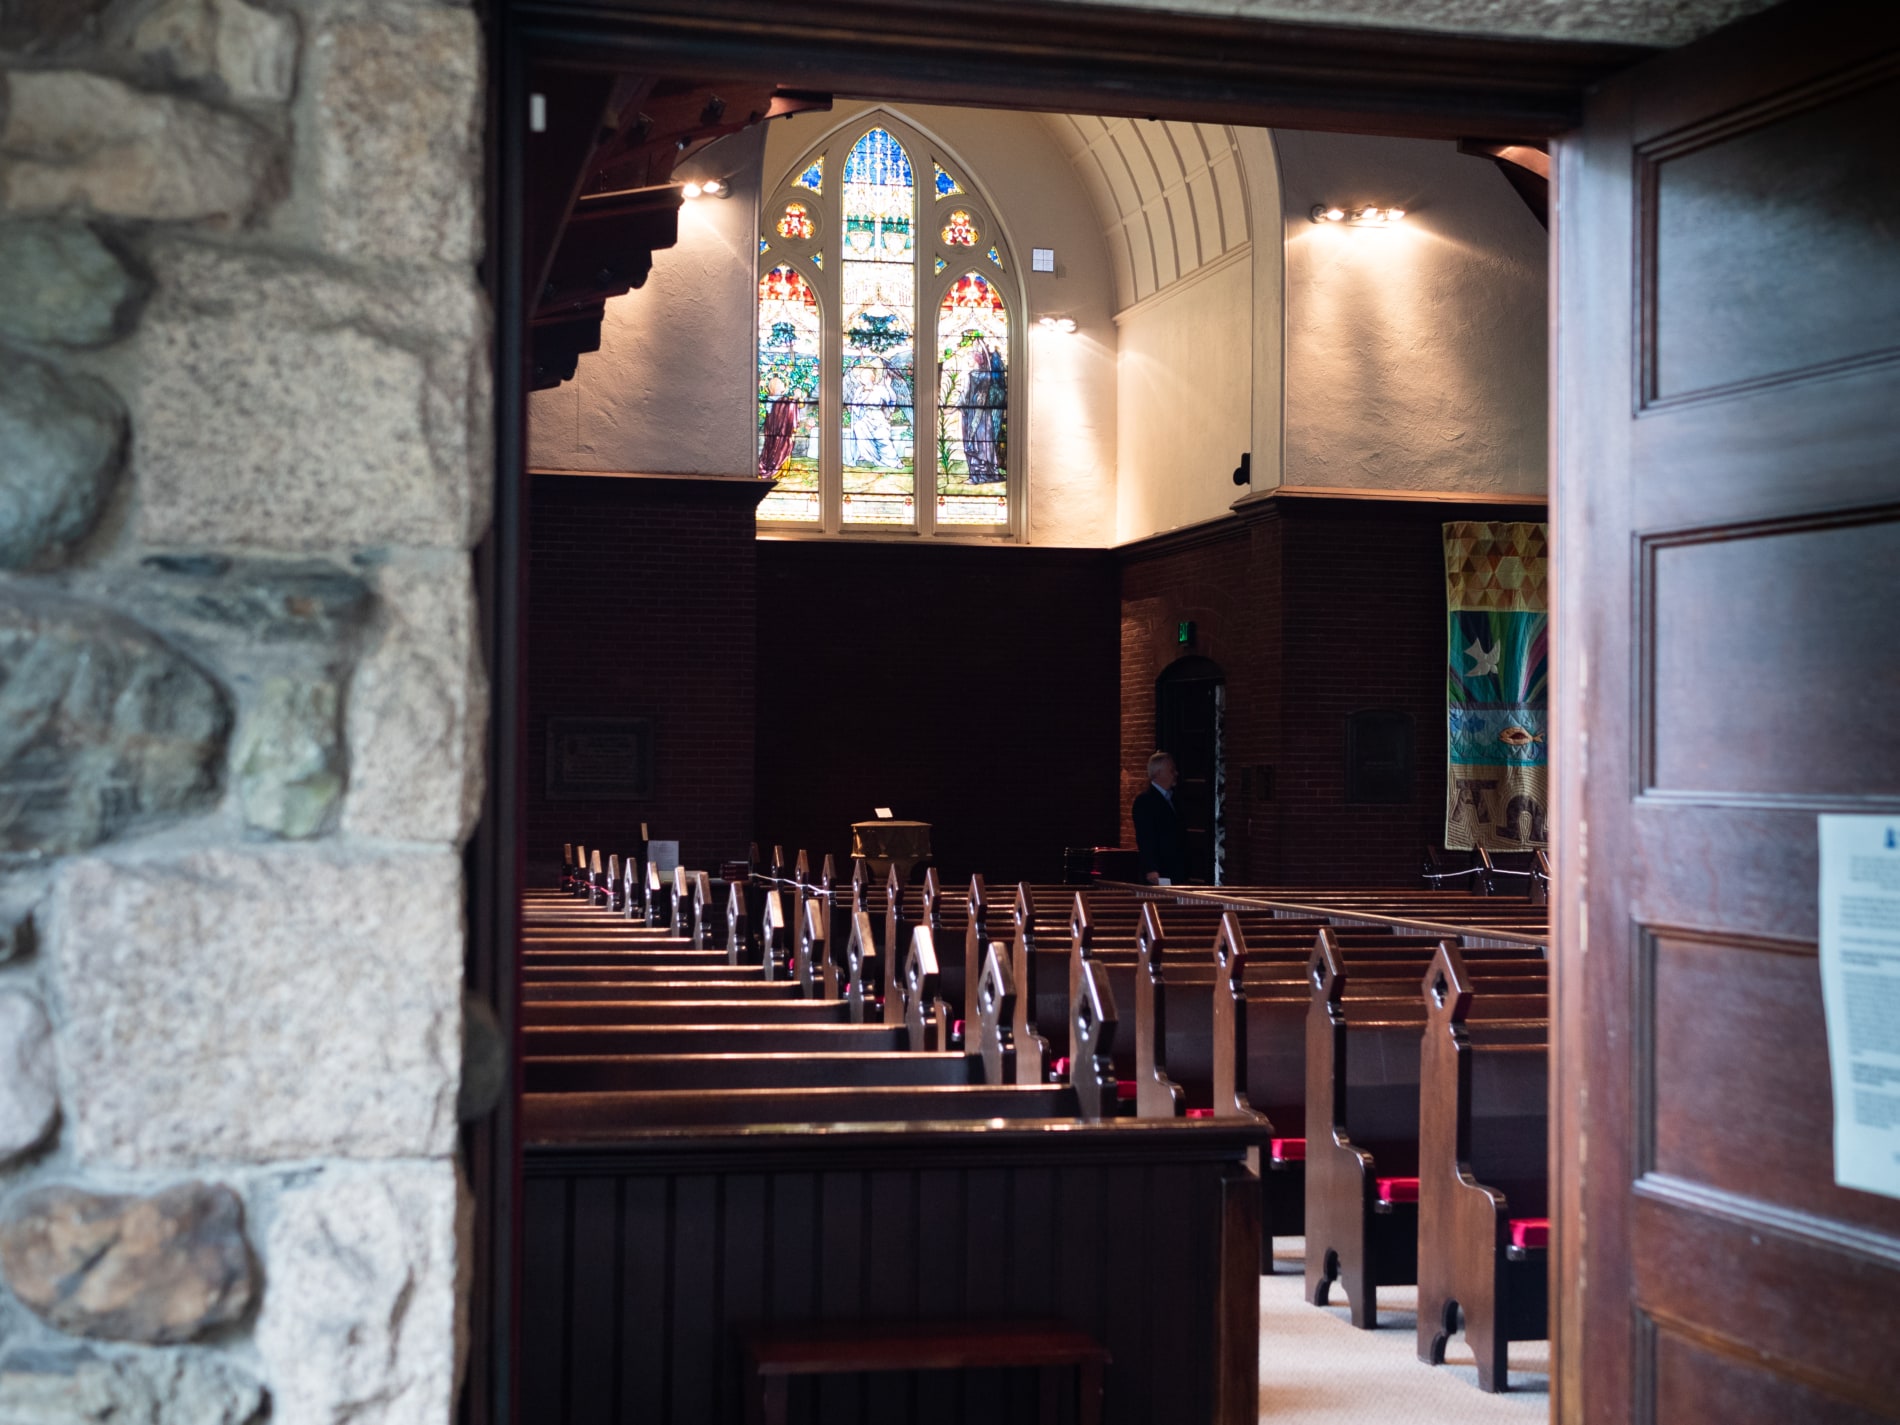 A view from an open door into the sanctuary